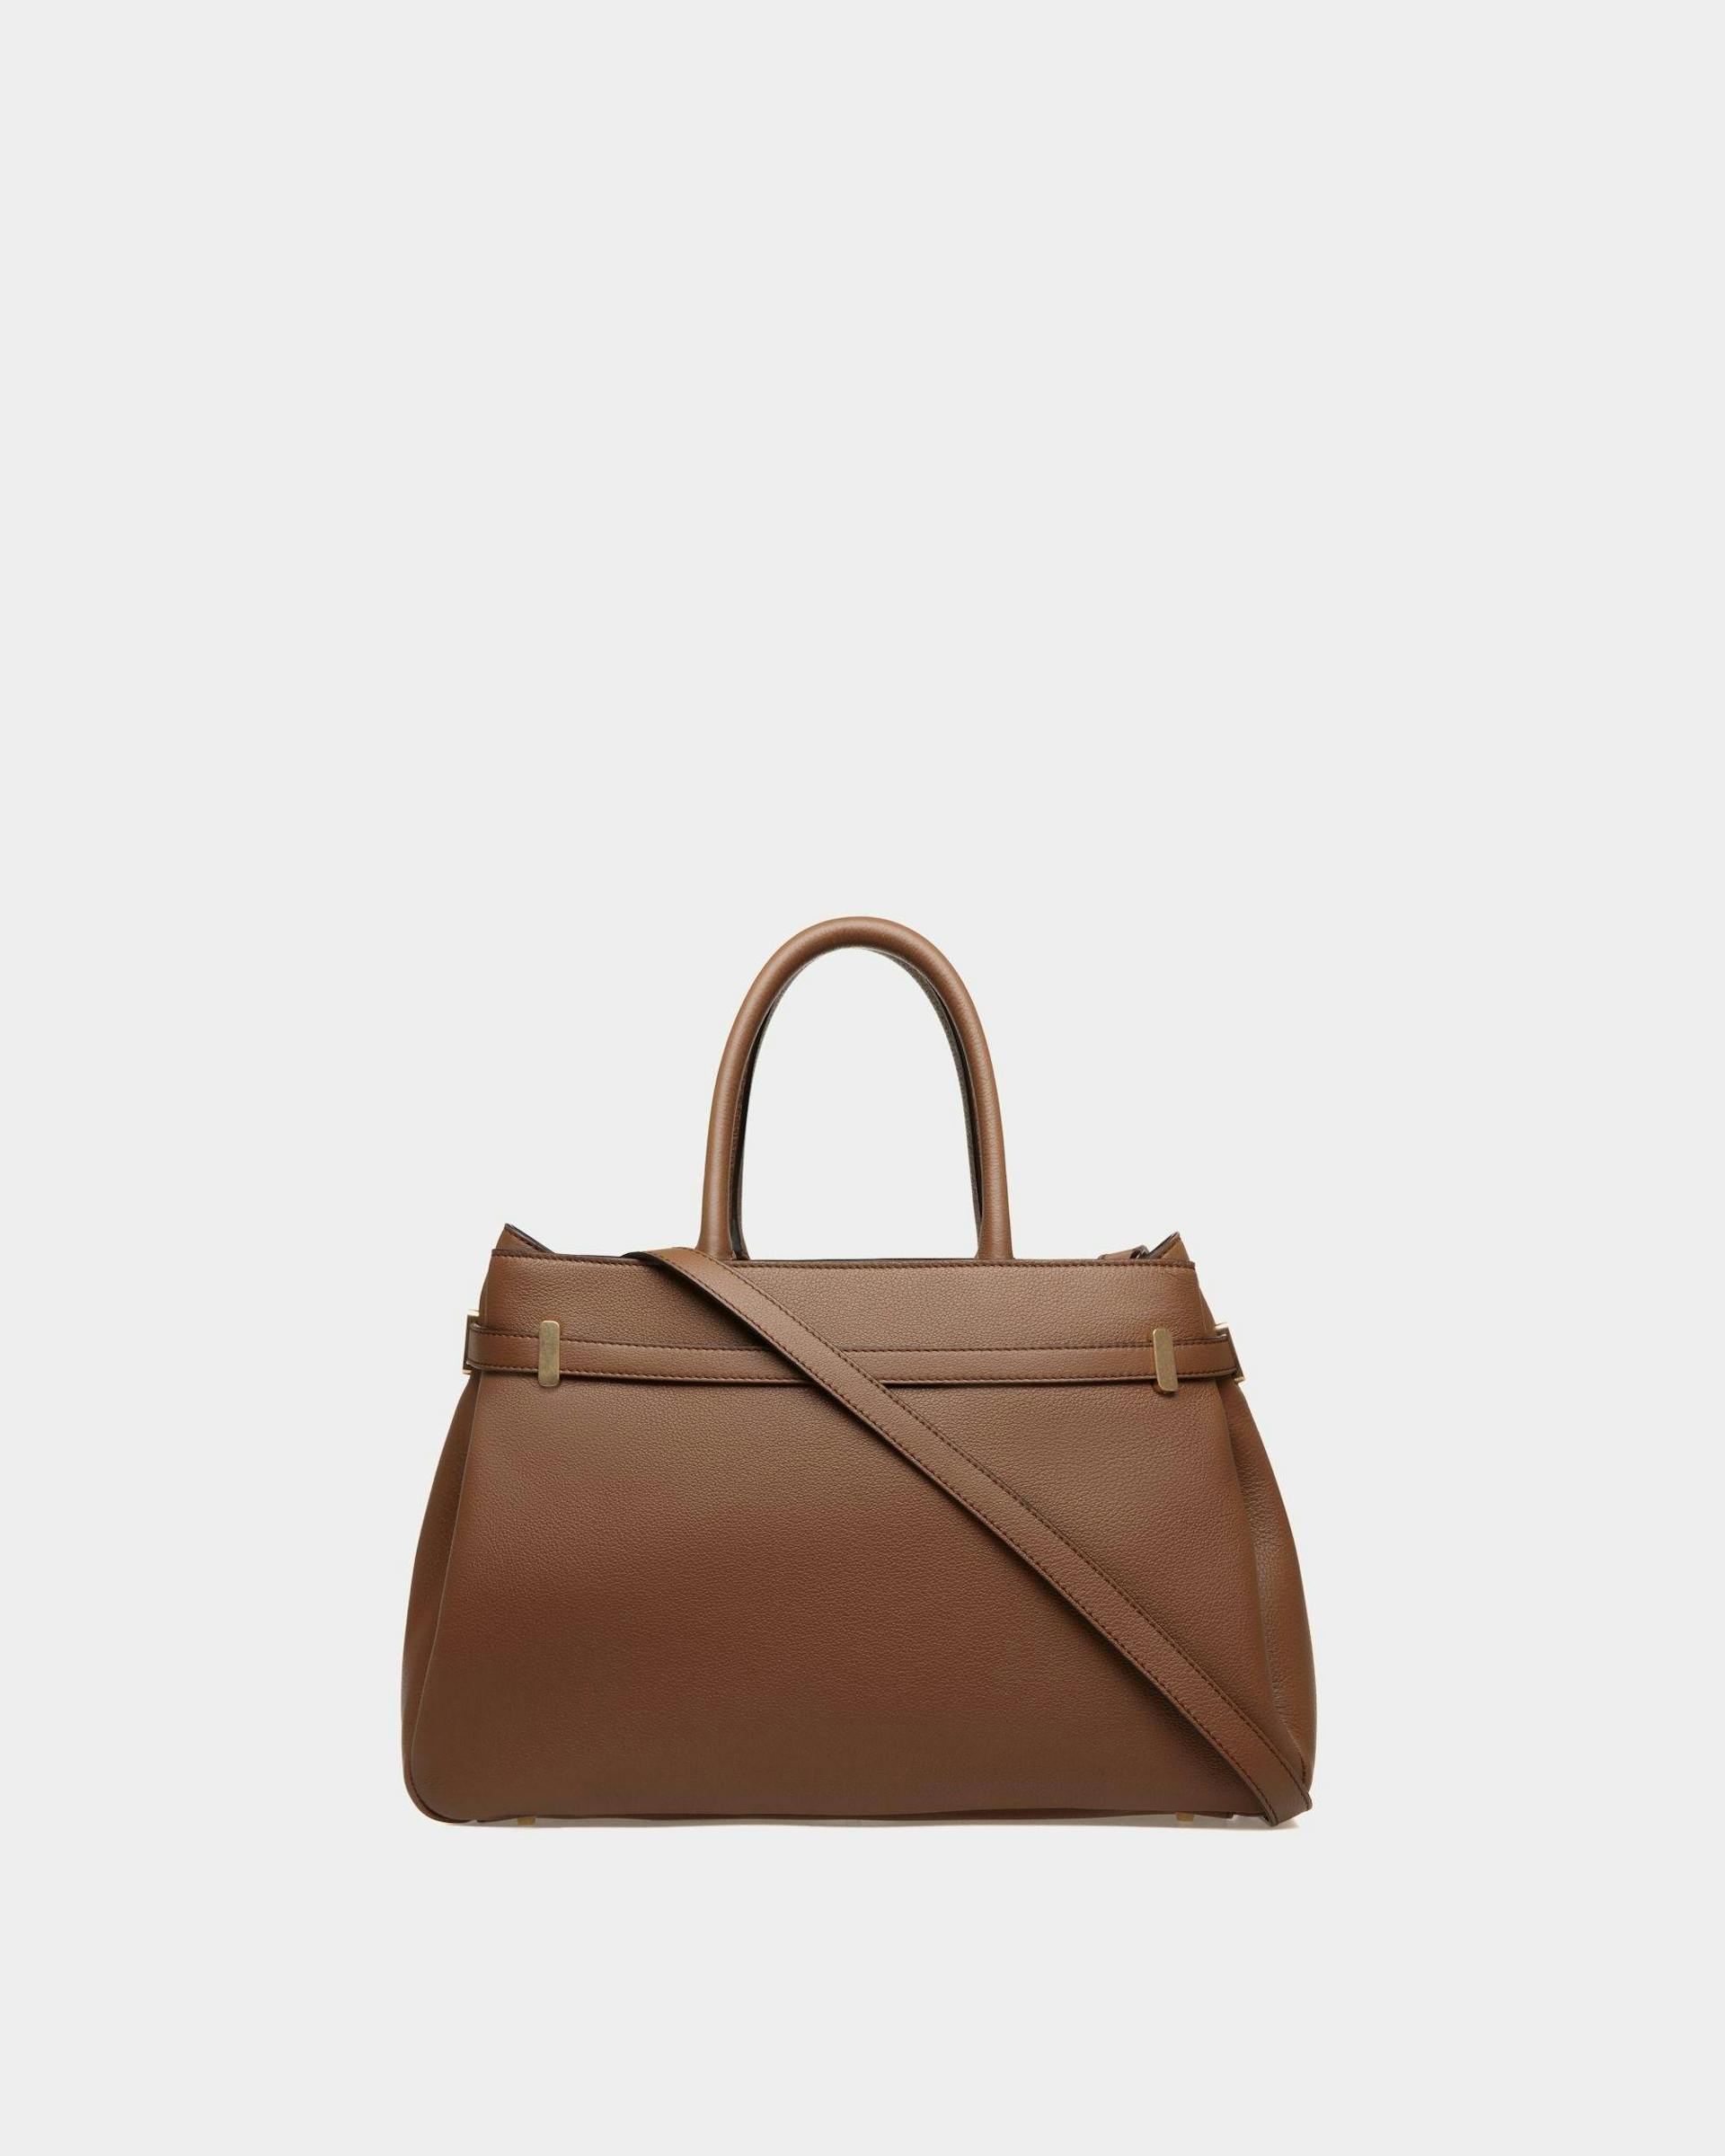 Carriage | Women's Tote Bag in Brown Leather | Bally